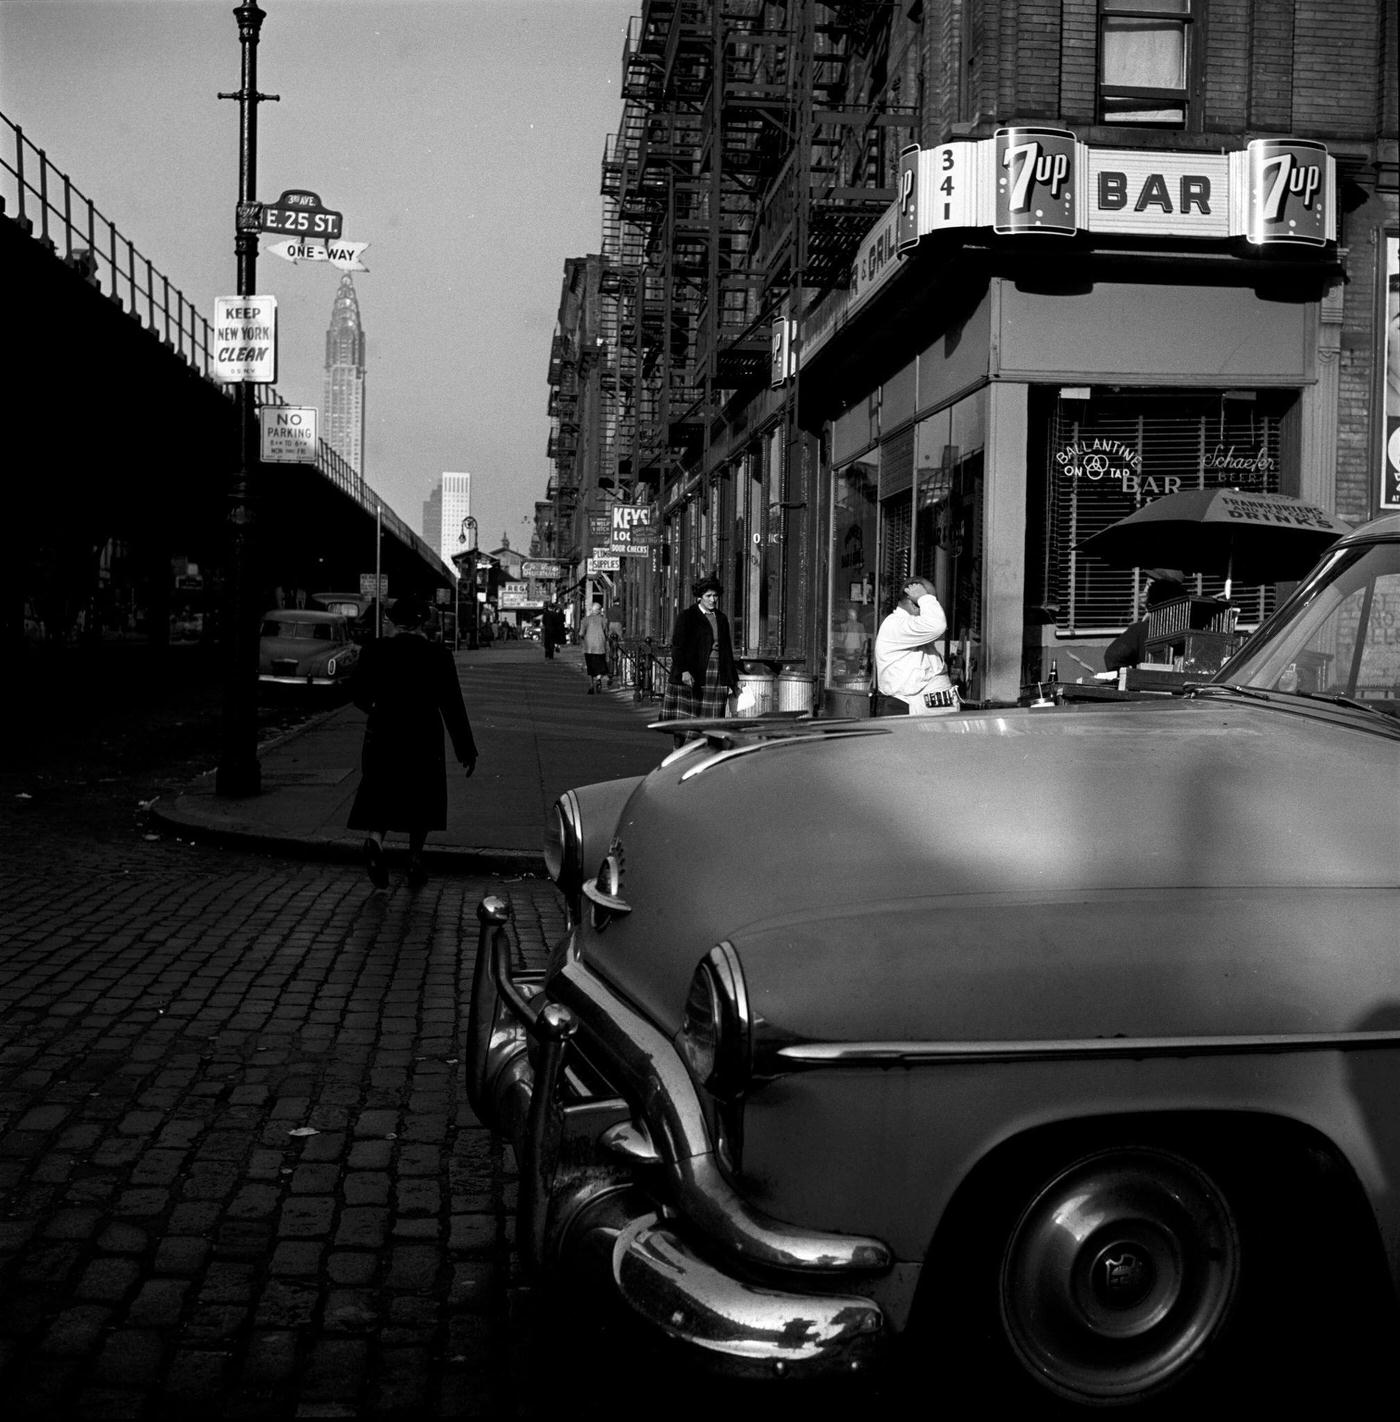 Looking Uptown In The Shadow Of The El: View Over Oldsmobile And Chrysler Building, Manhattan, 1954